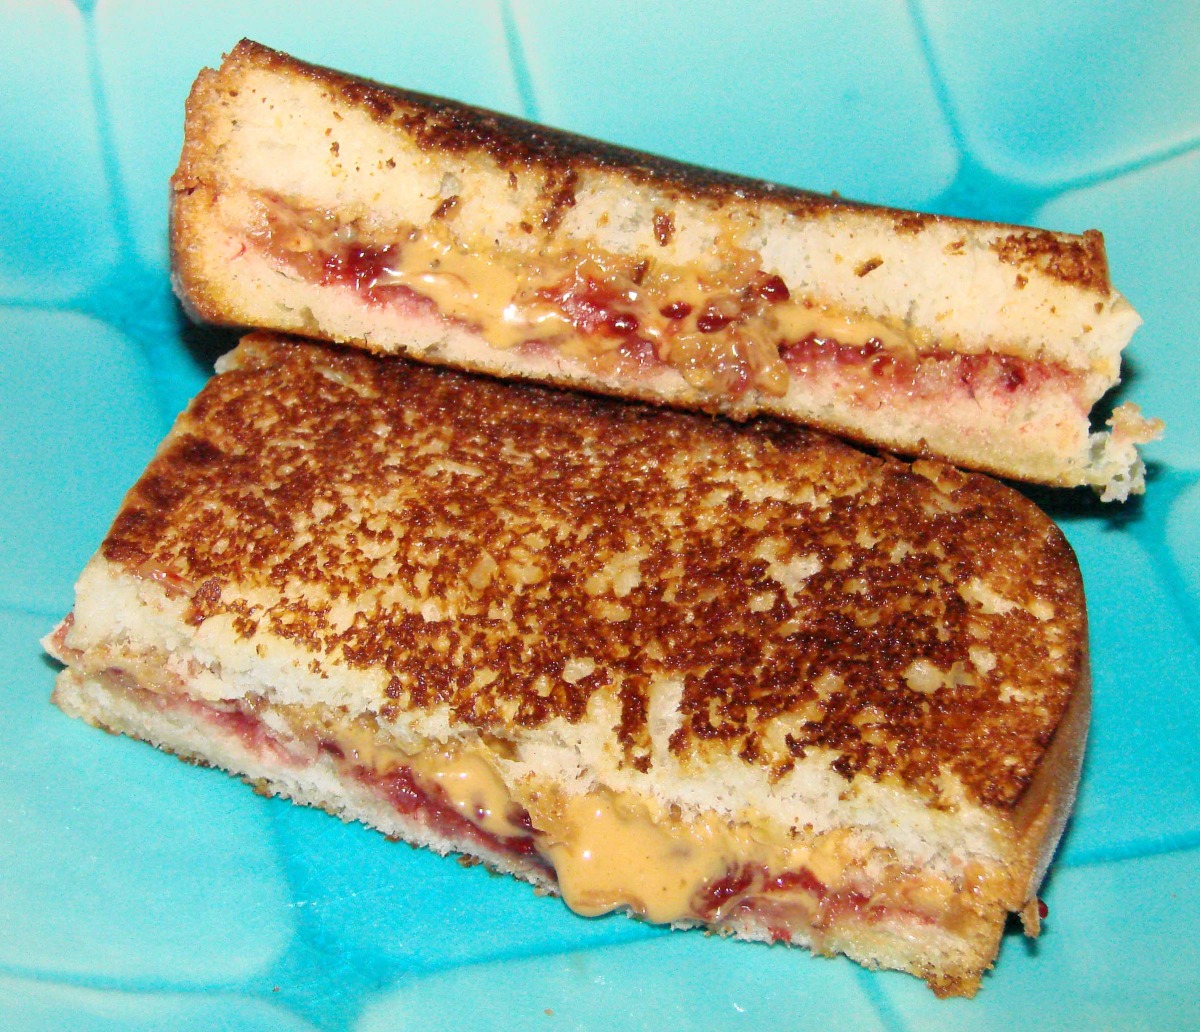 Fried Peanut Butter and Jelly Sandwich image